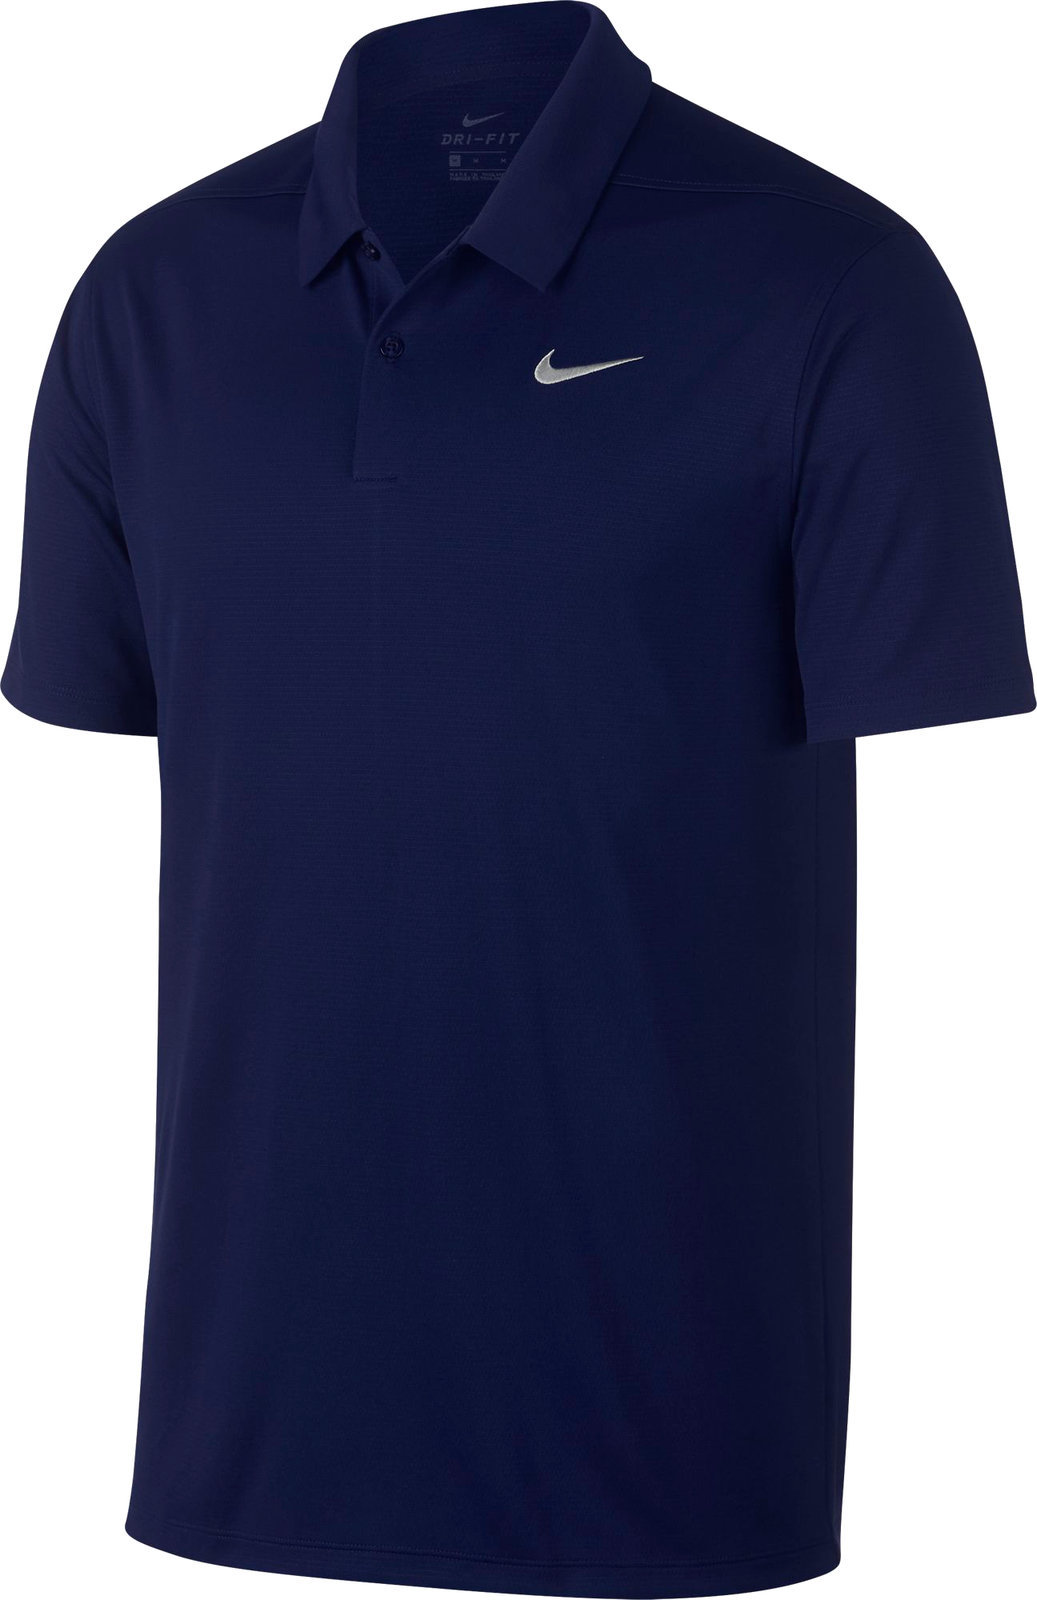 Polo trøje Nike Dry Essential Solid Blue Void/Flat Silver S